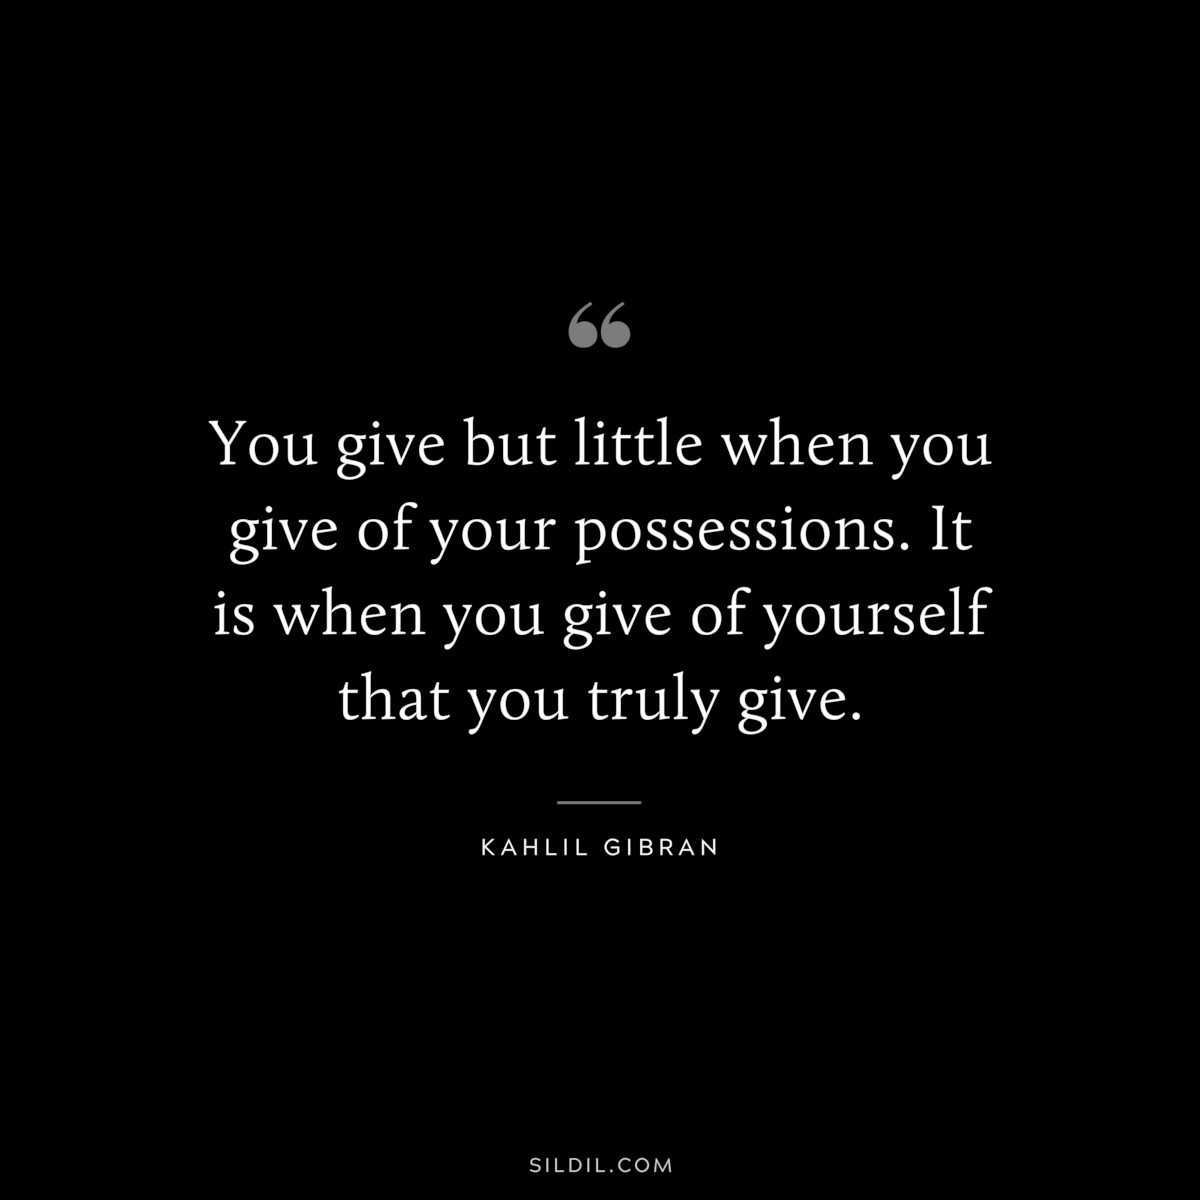 You give but little when you give of your possessions. It is when you give of yourself that you truly give. ― Kahlil Gibran